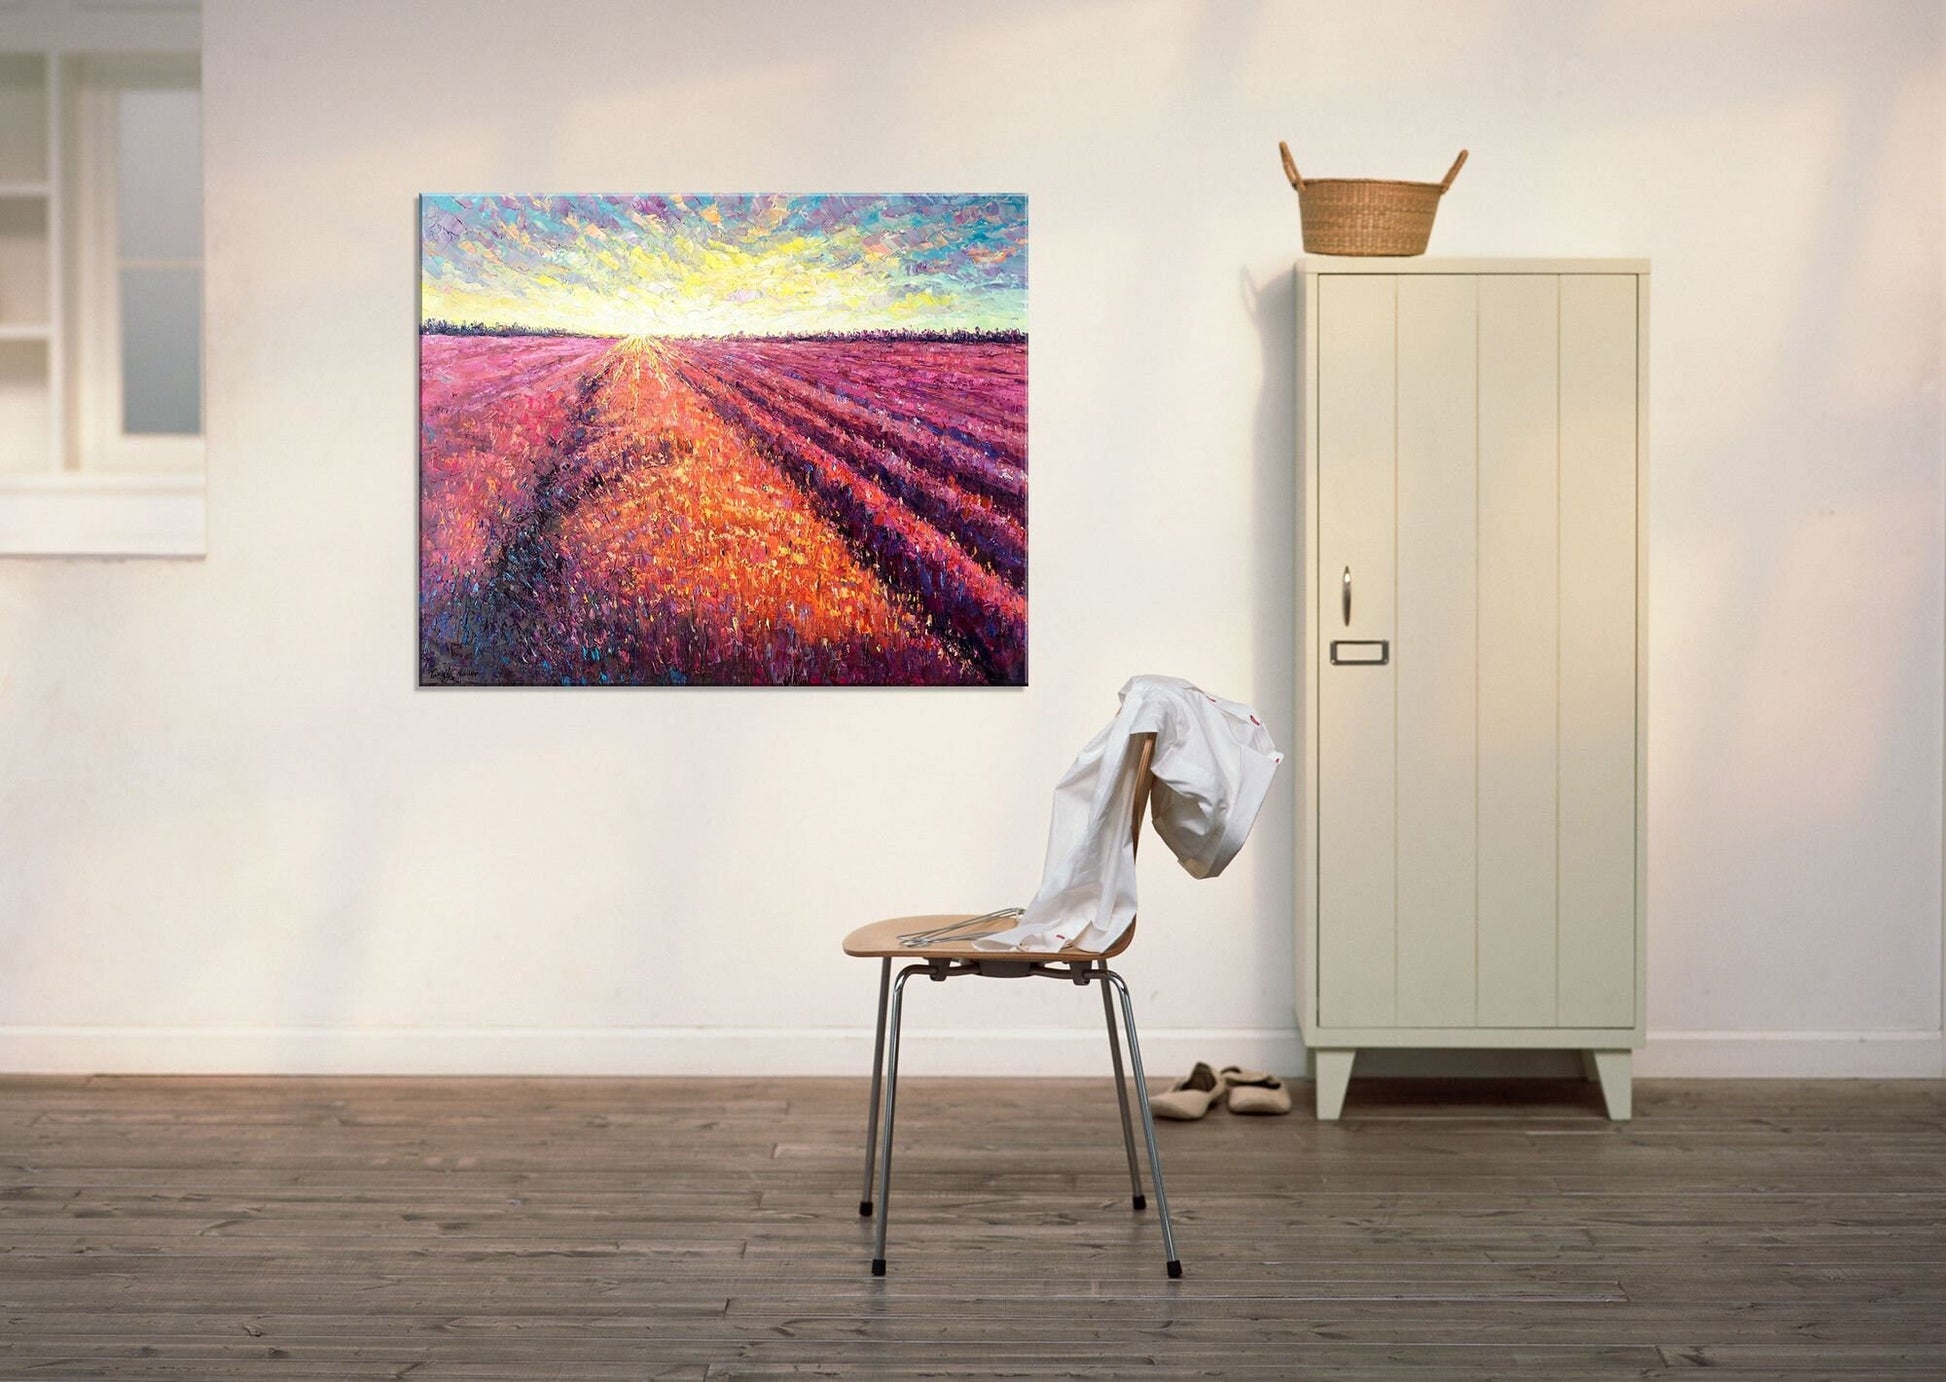 Landscape Oil Painting French Provence Lavender Fields at Dawn, Living Room Decor, Abstract Oil Painting, Abstract Canvas Art, Wall Decor